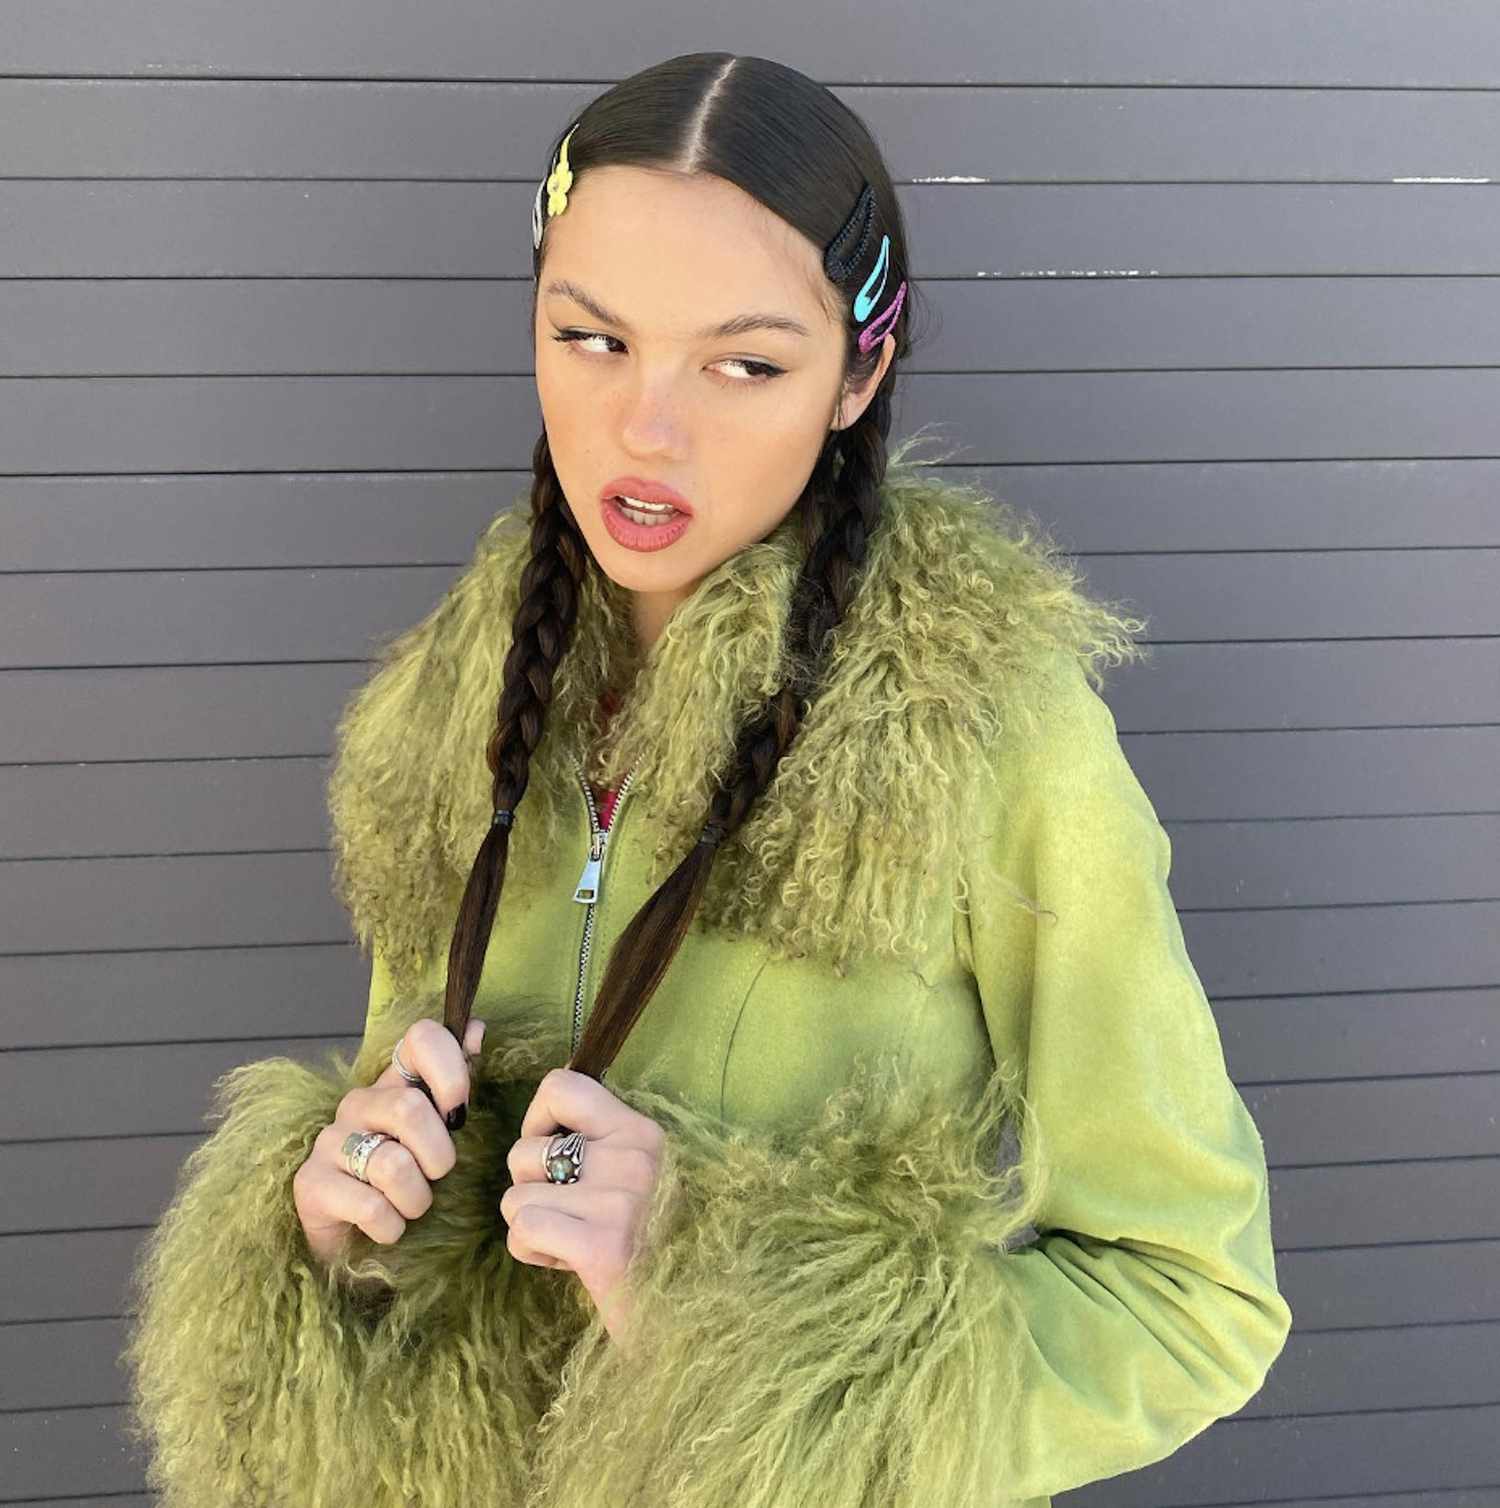 Olivia Rodrigo wears braided pigtails with multicolored hair clips and a green fluffy coat